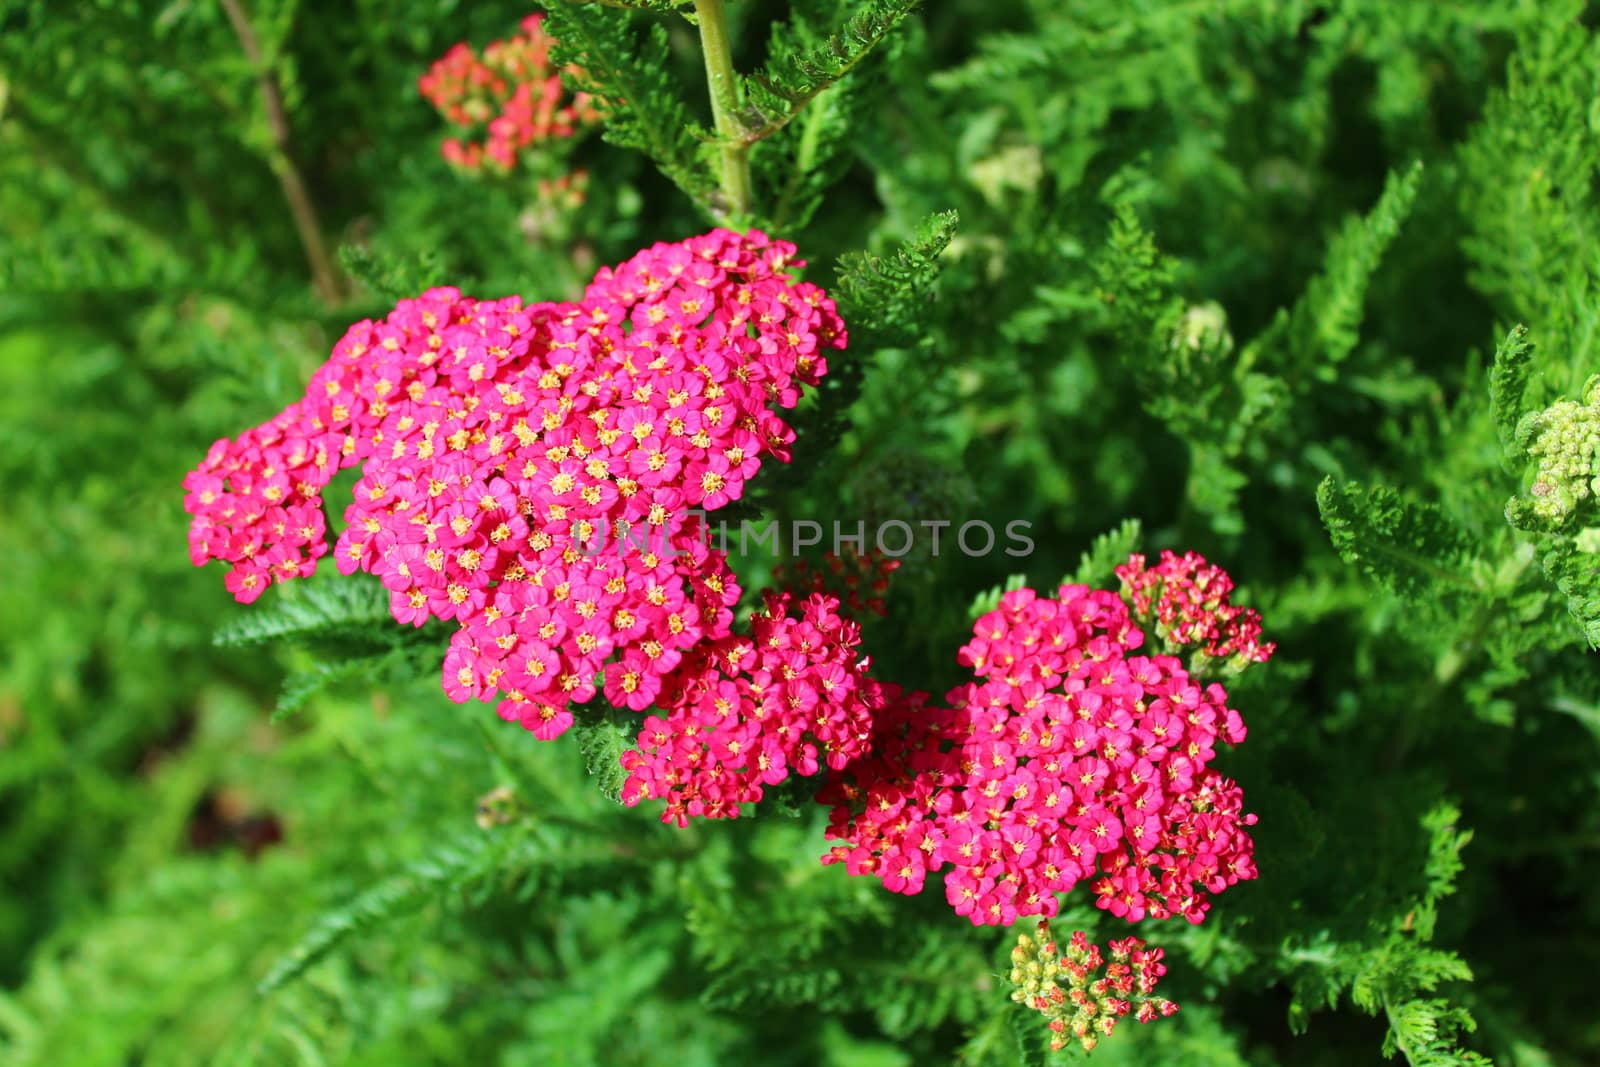 The picture shows pink blossoming yarrow in the garden